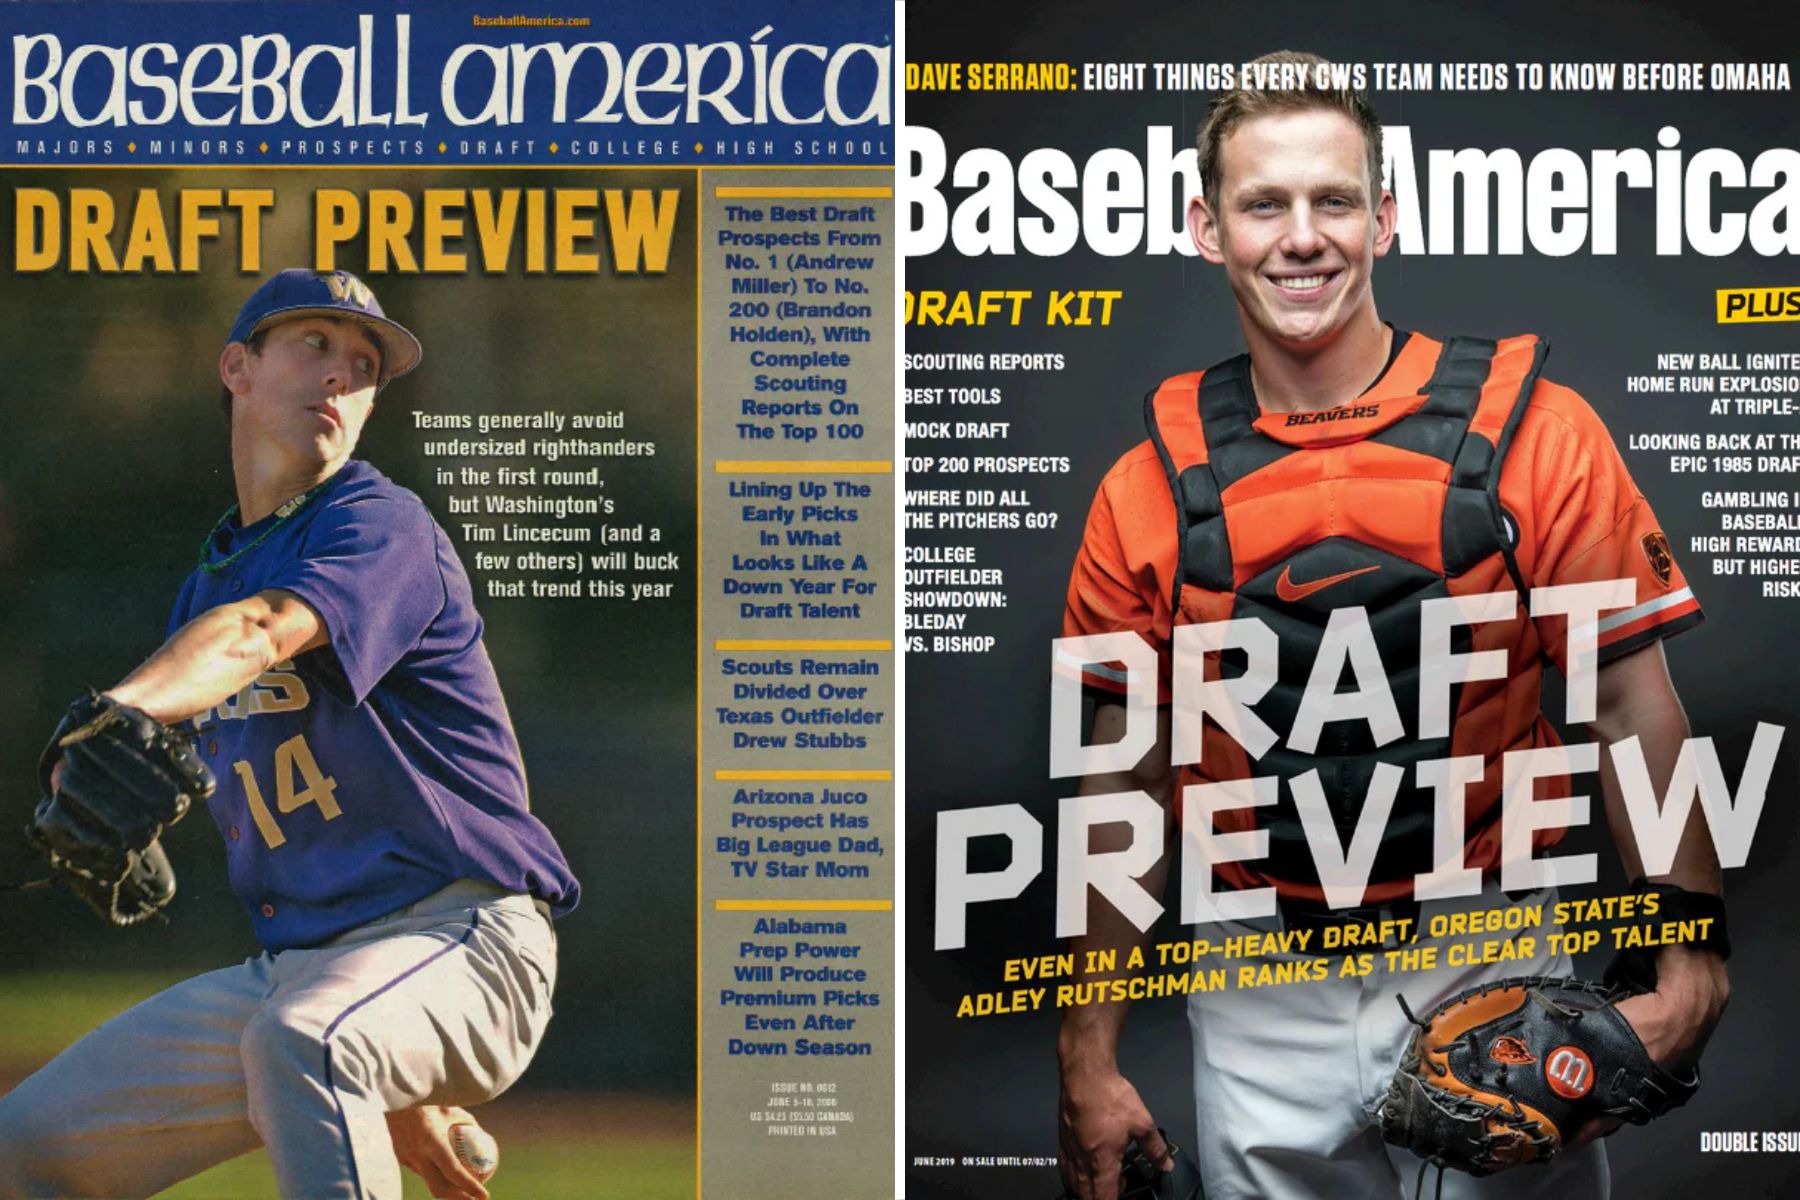 Tim Lincecum and Adley Rutschman were two Pac-12 stars who made the Baseball America draft preview cover.